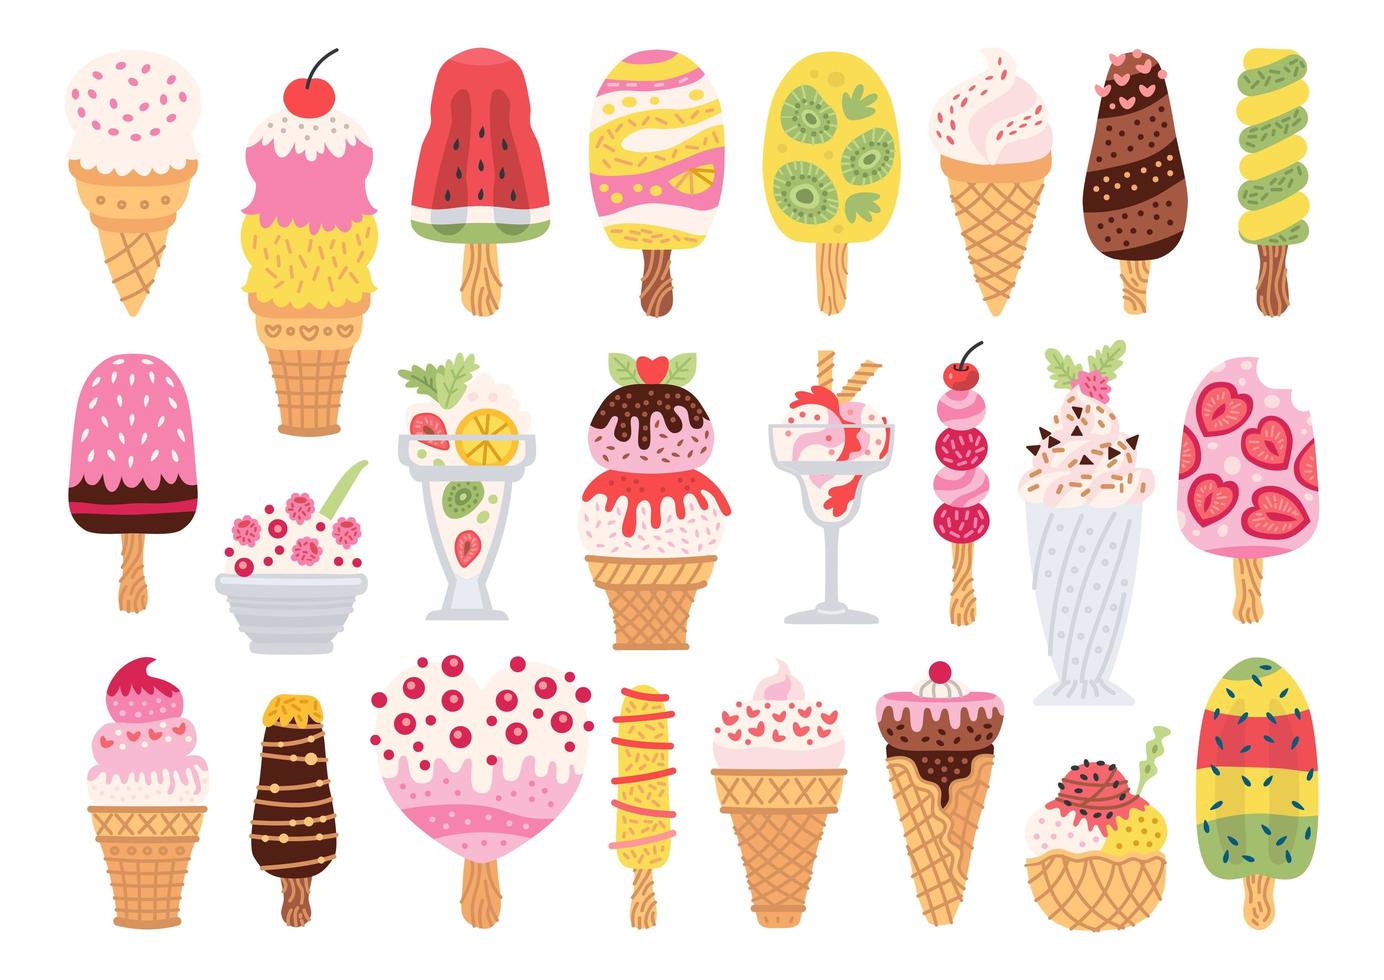 Set of different types of ice cream vector